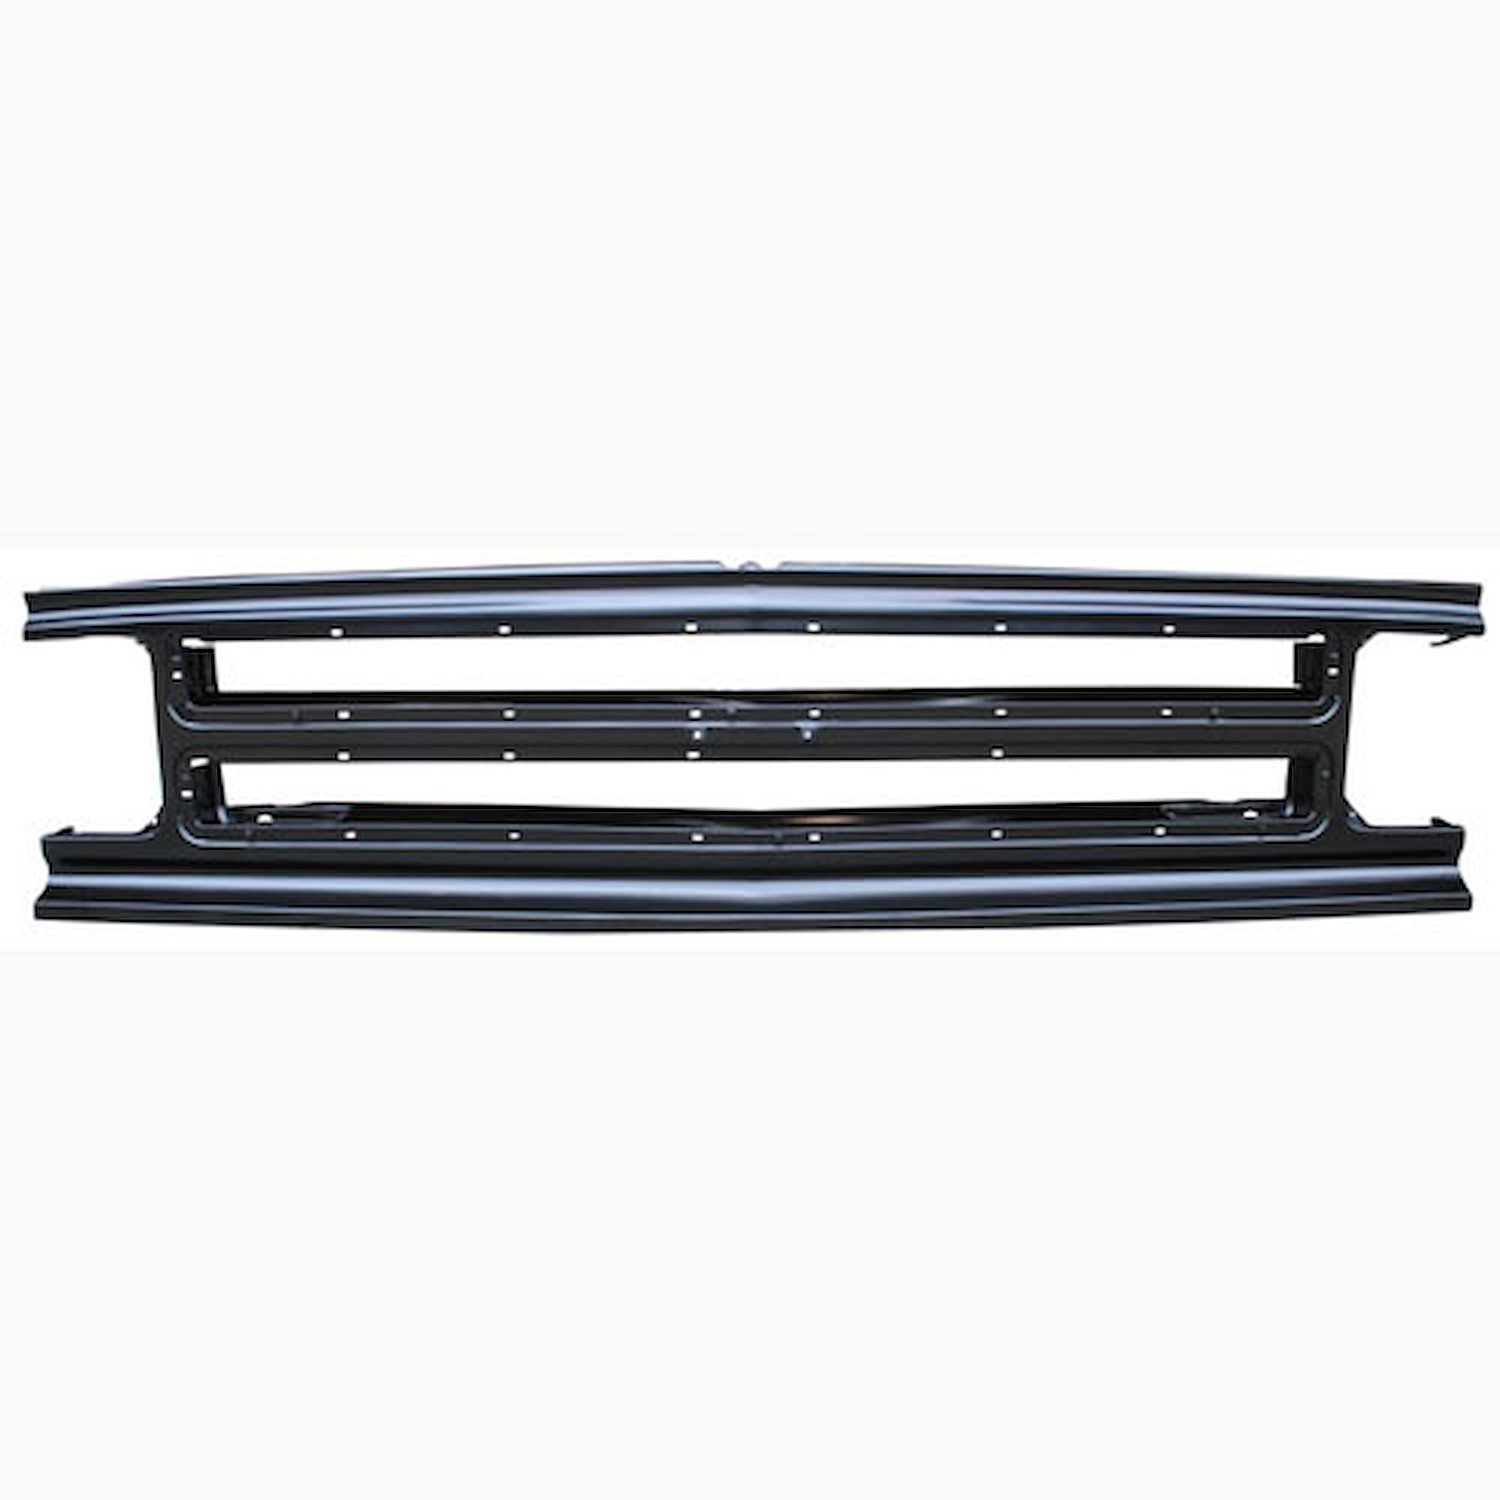 OE Reproduction Grille 1967-1968 Chevrolet Pickup